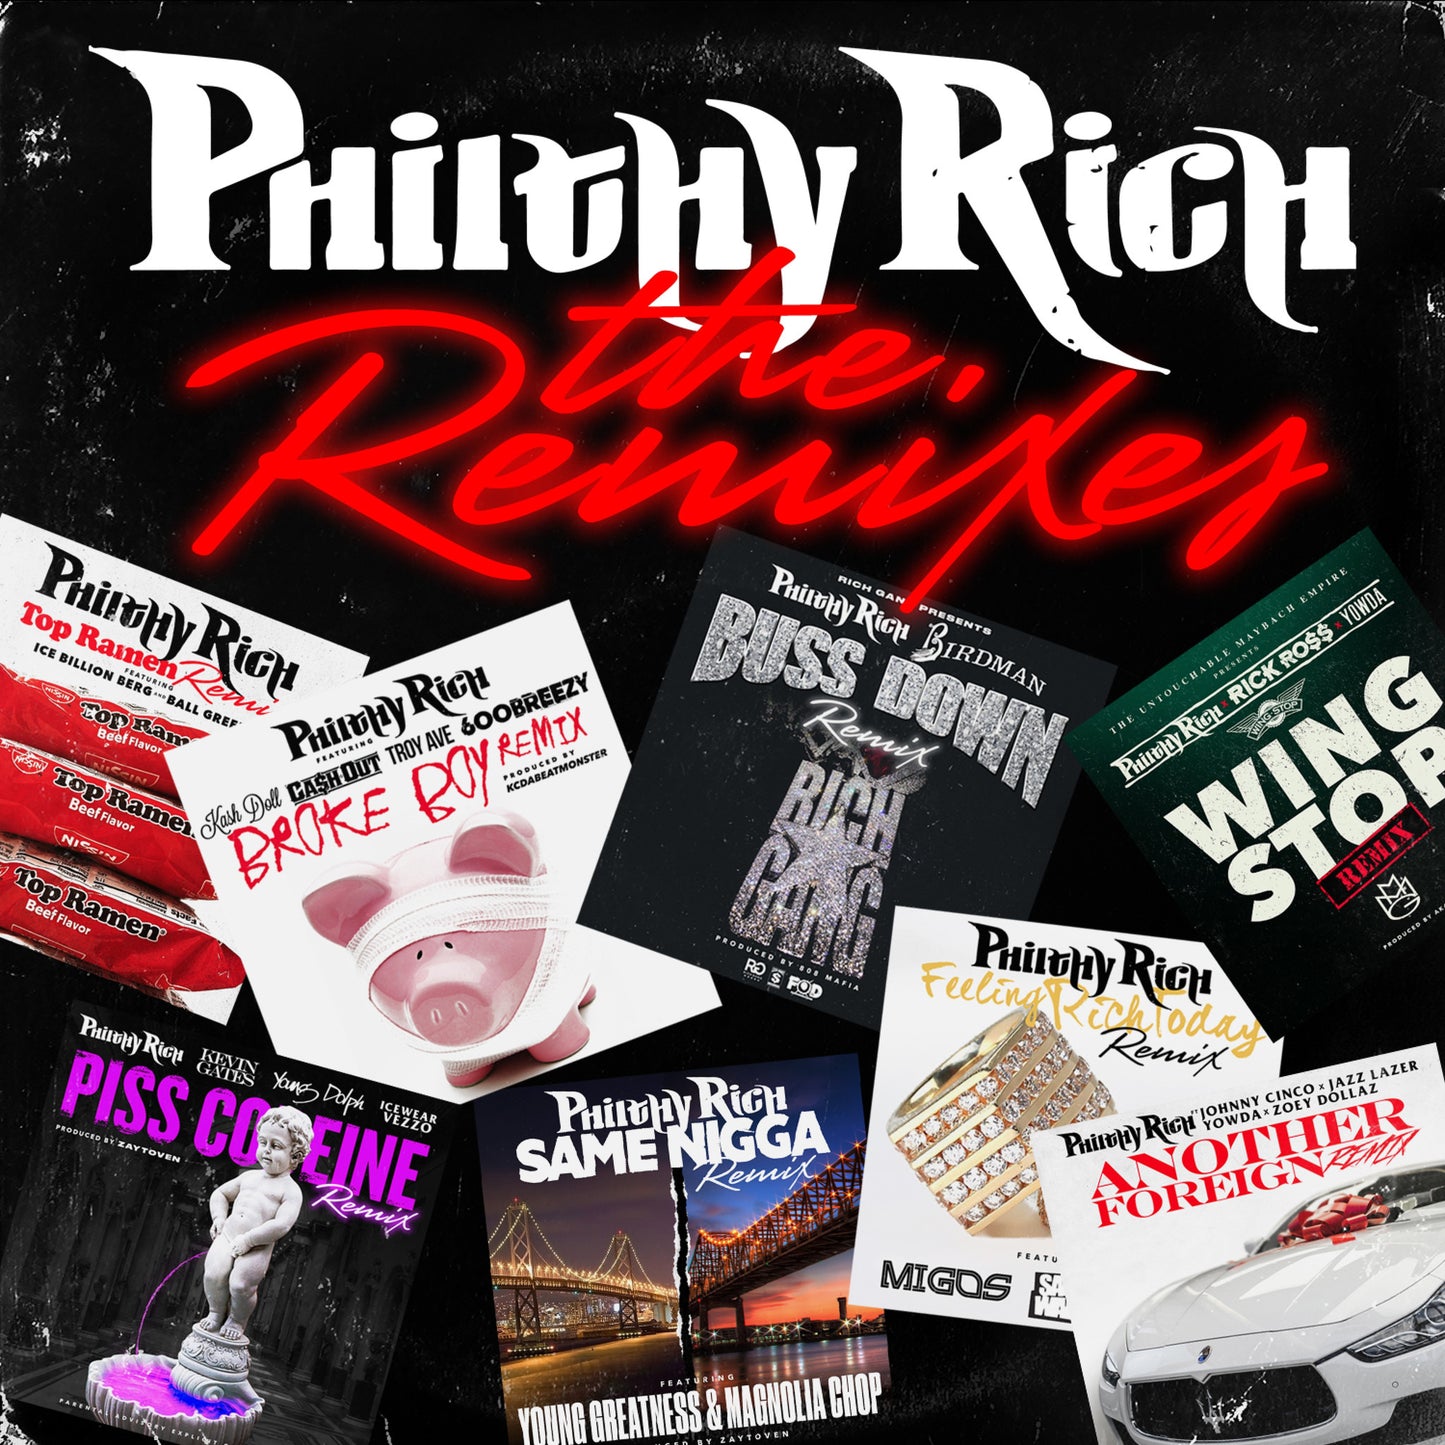 Philthy Rich - The Remixes CD